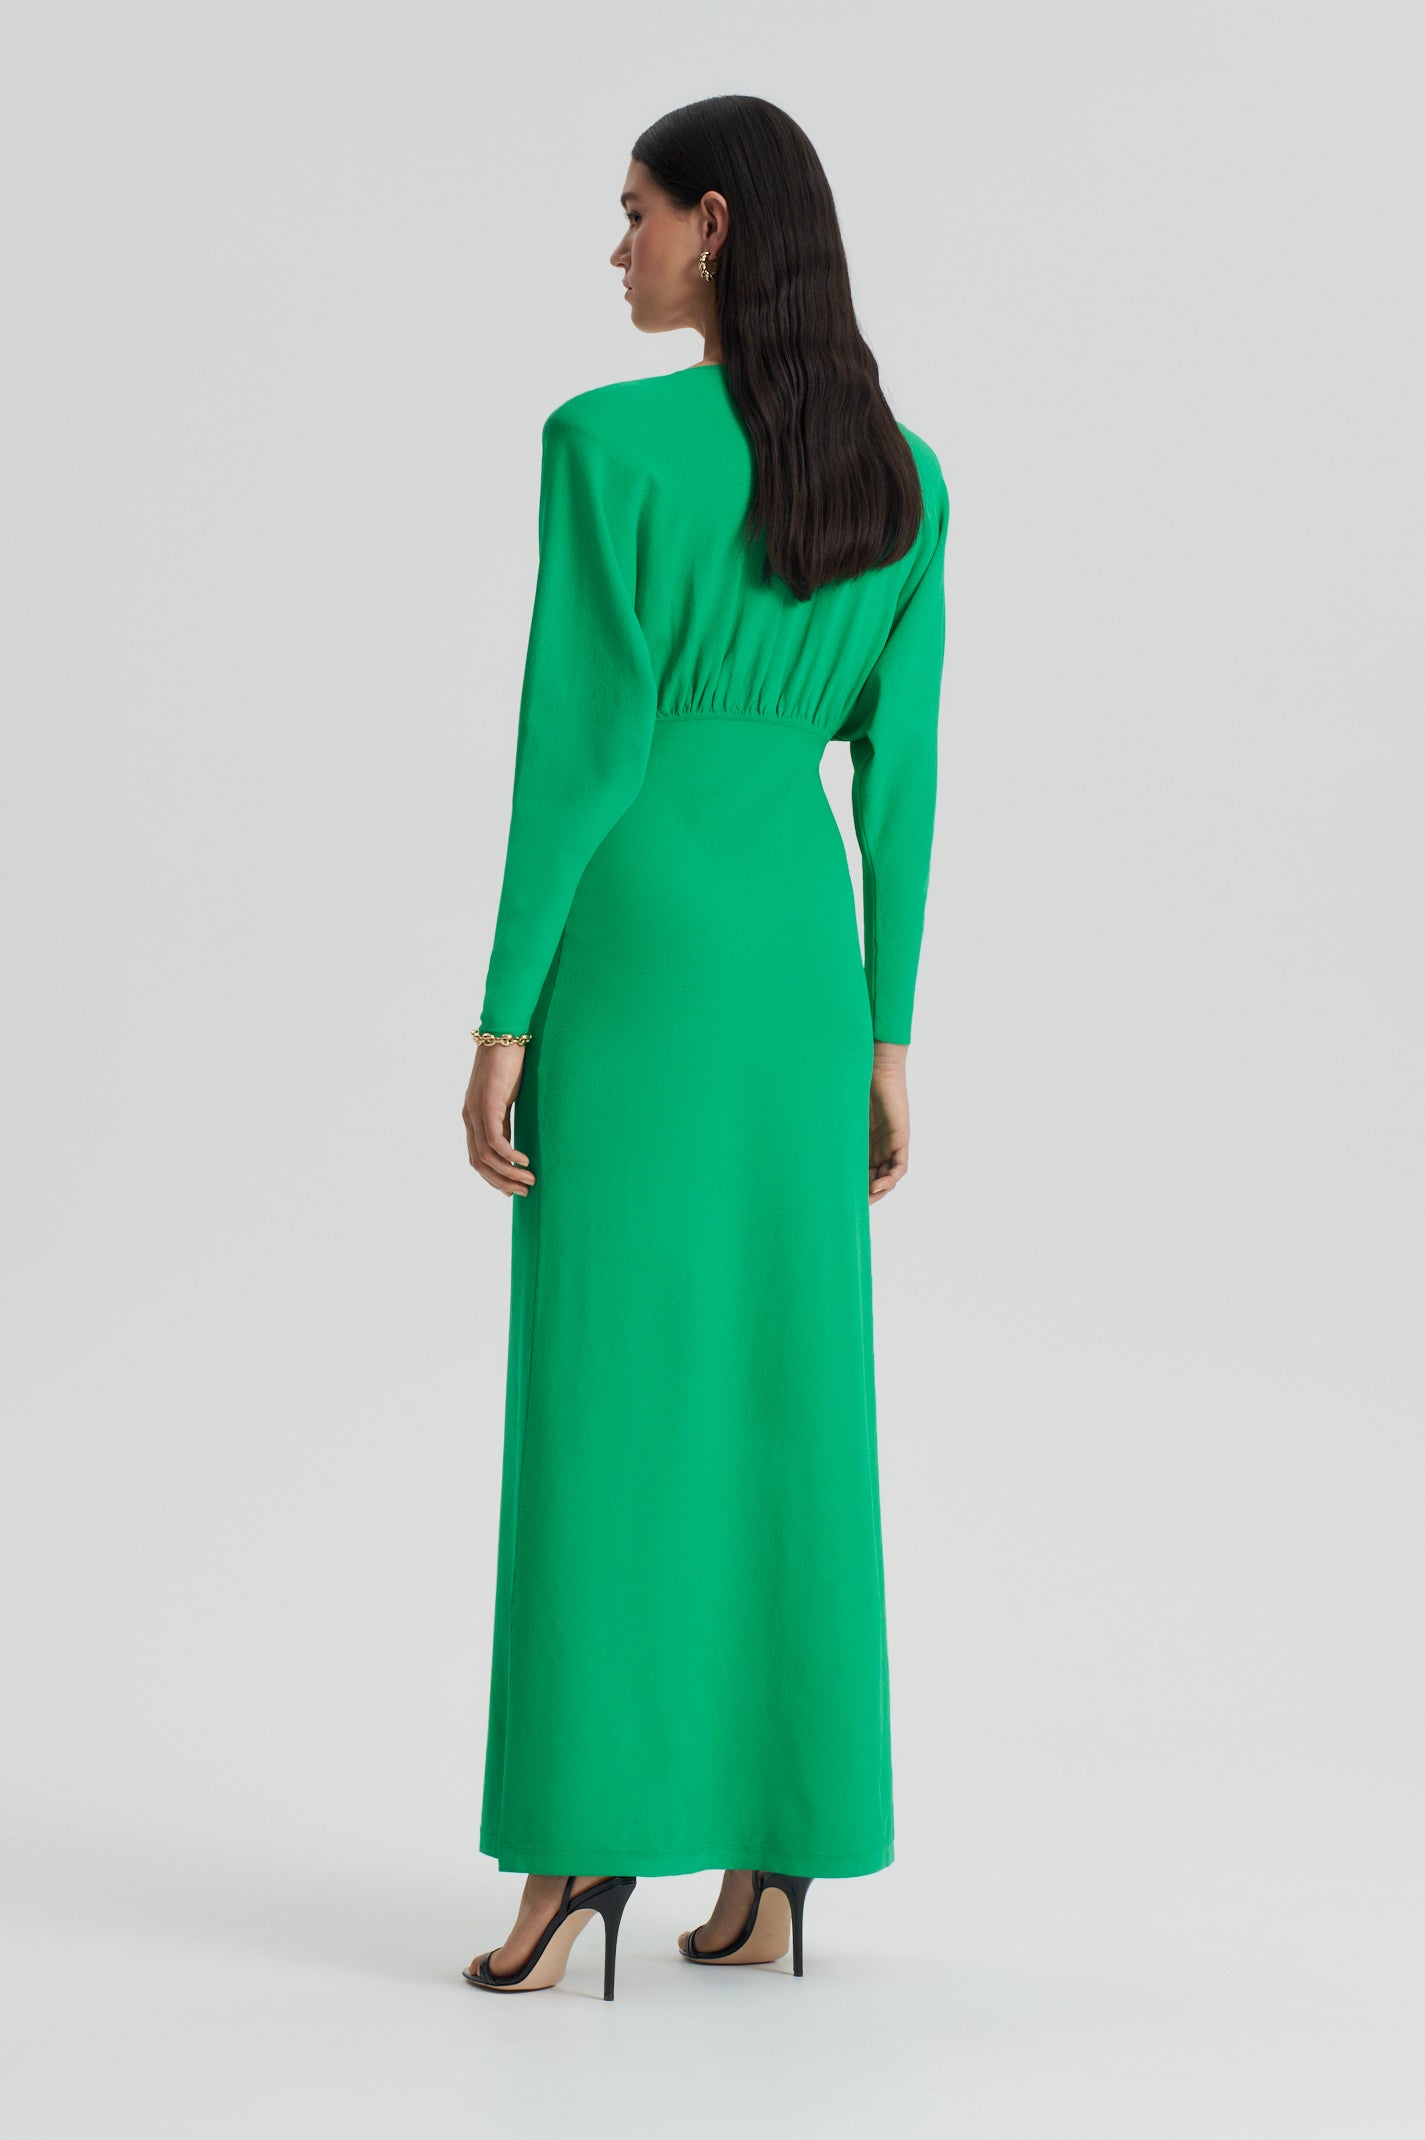 CREPE KNIT DOLMAN SLEEVE GOWN - GREEN - Scanlan Theodore